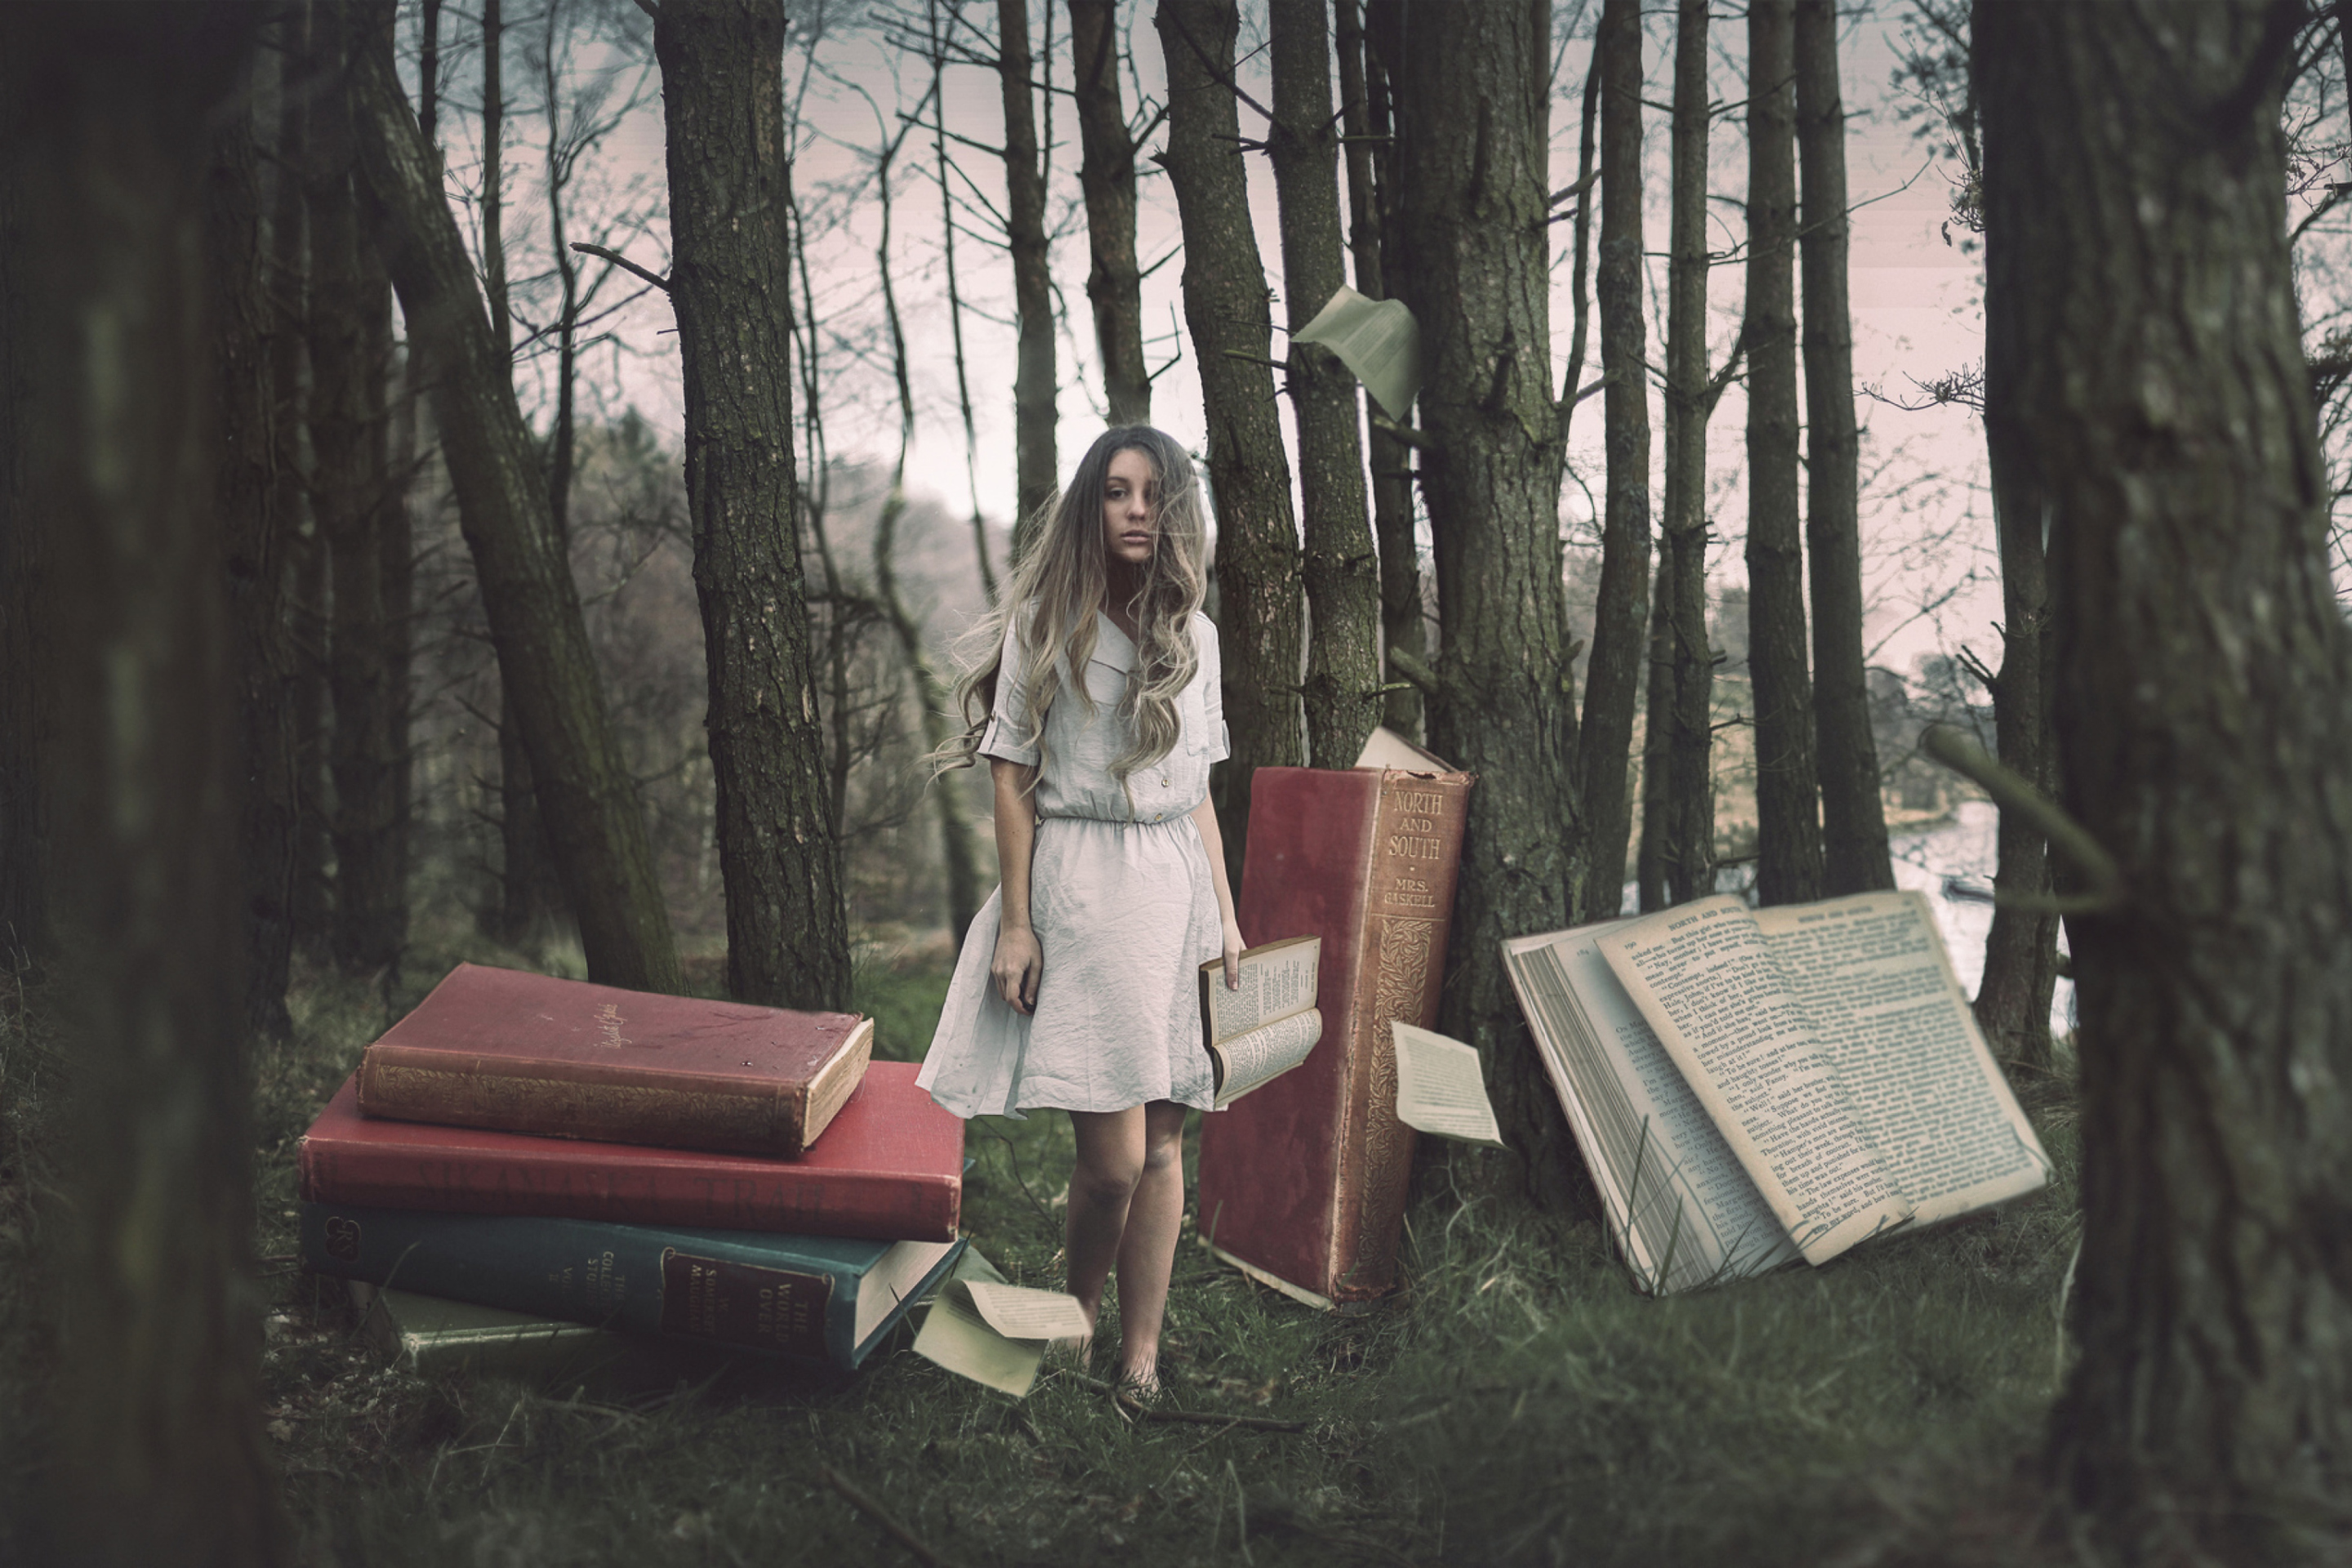 Обои Forest Nymph Surrounded By Books 2880x1920